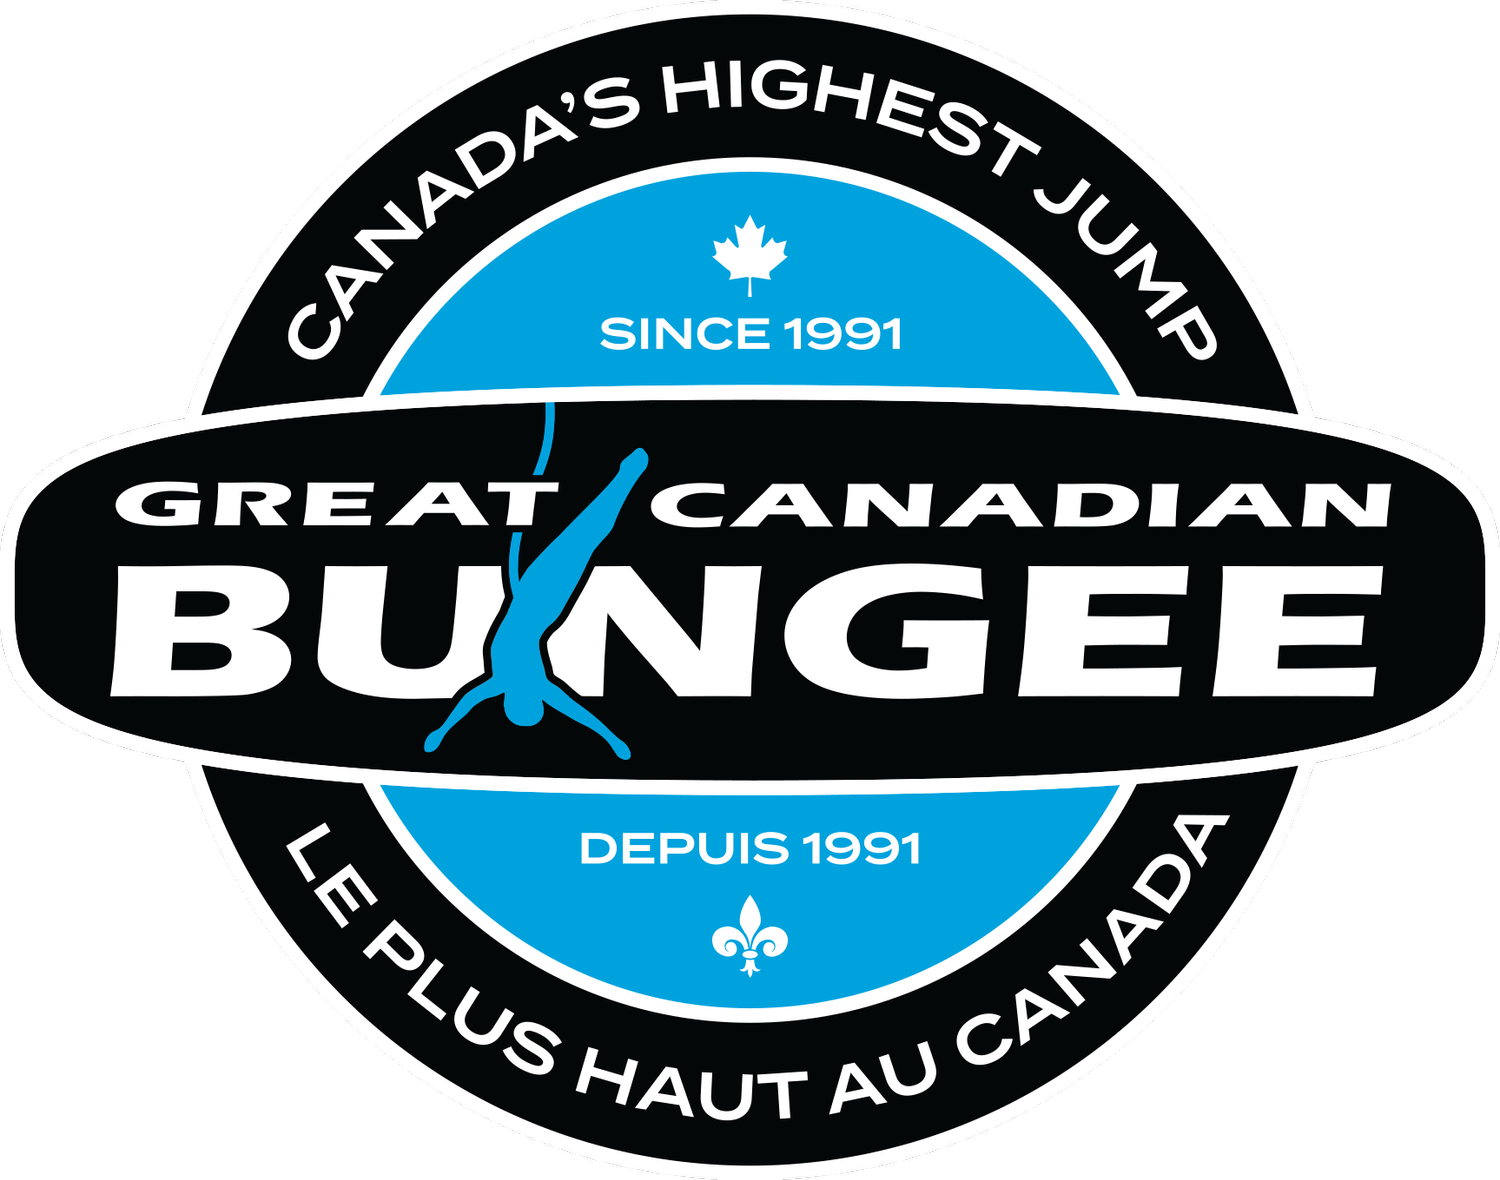 Great Canadian Bungee | Canada's Highest Jump | Bungee Jumping +  Ripride Zipline | Chelsea, Quebec